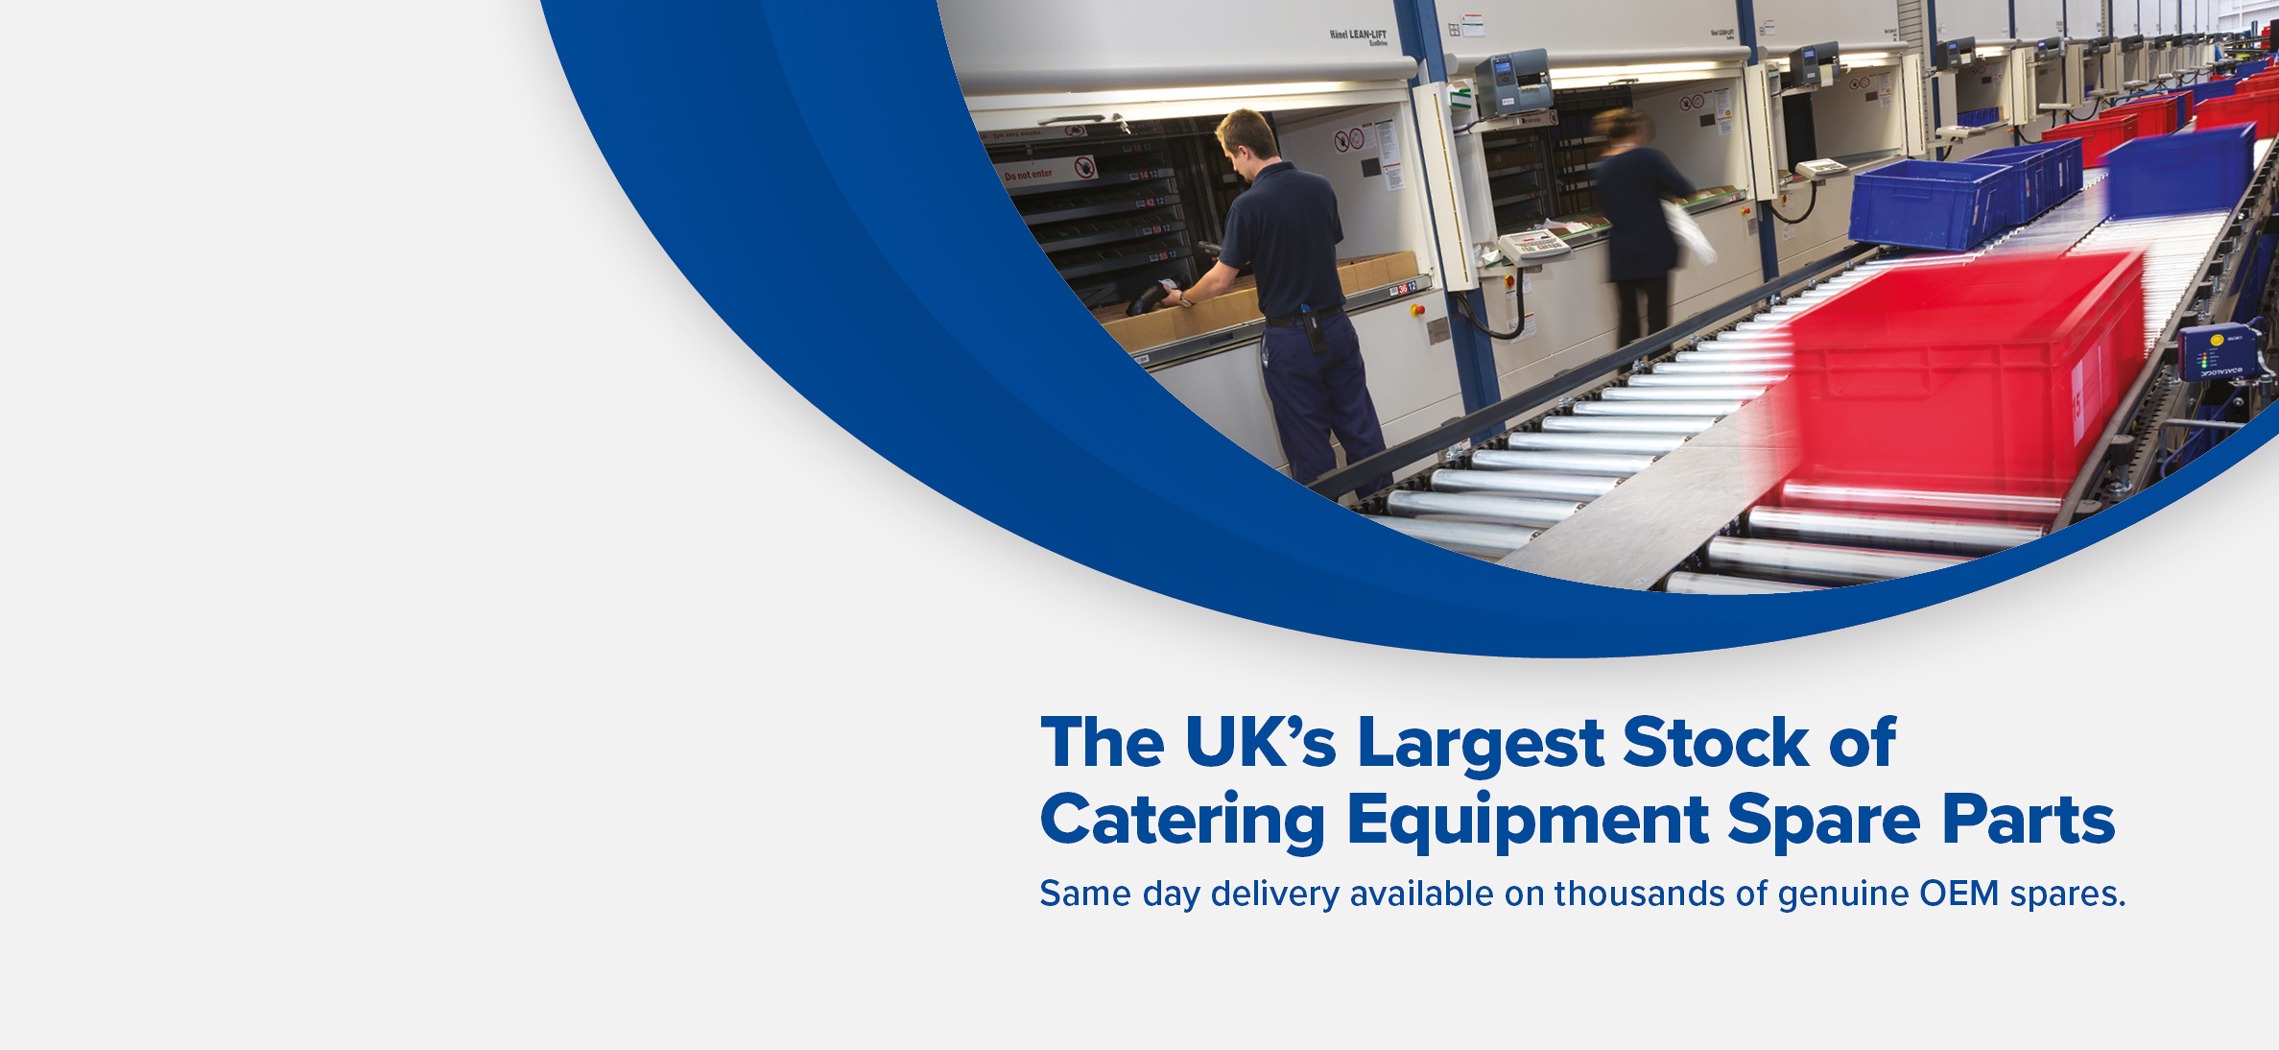 The UK's Largest Stock of OEM Catering Equipment Parts